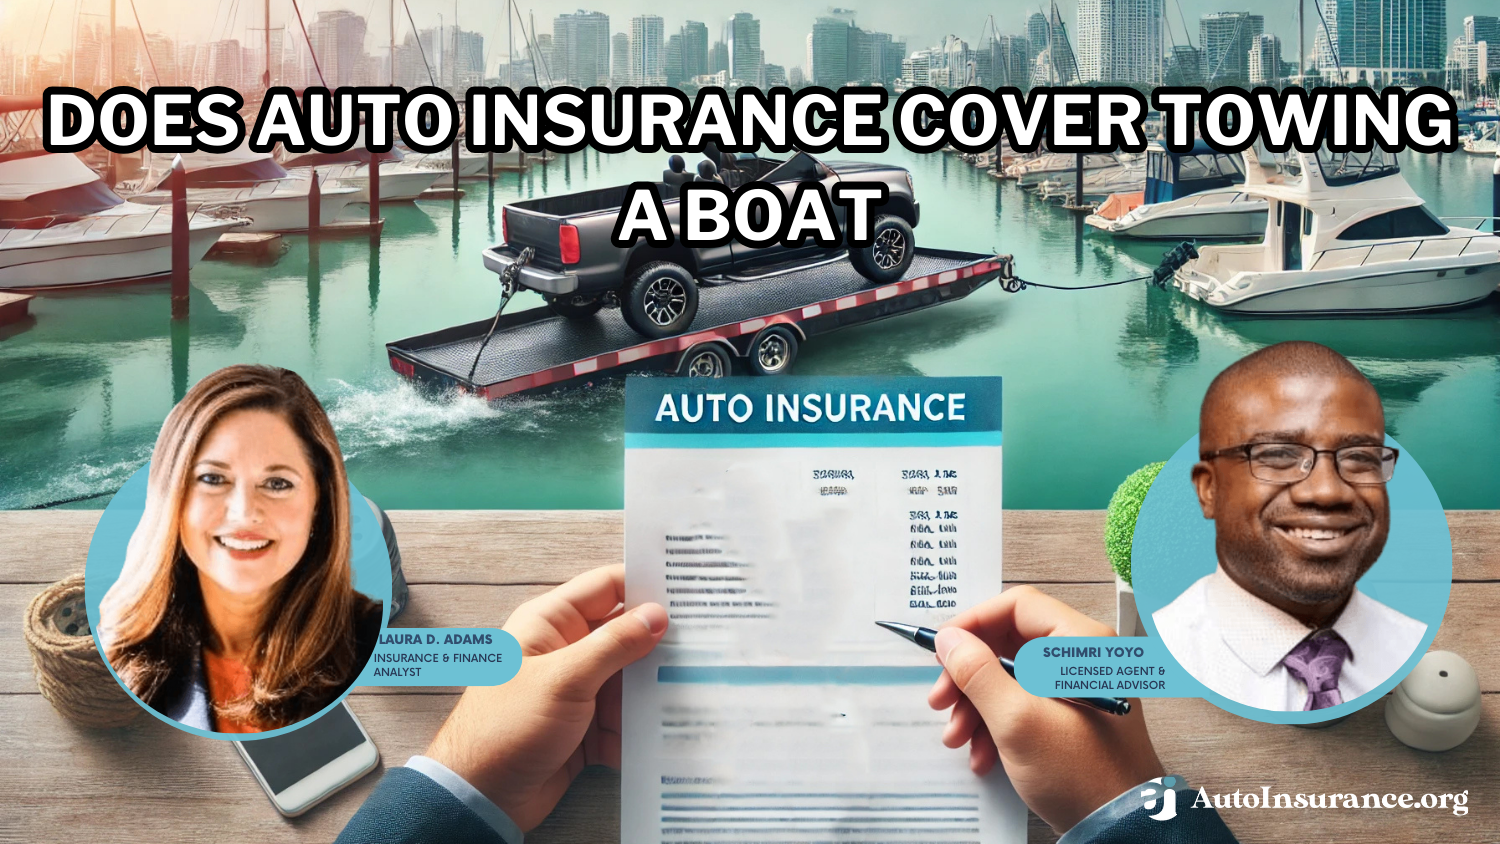 Does auto insurance cover towing a boat?